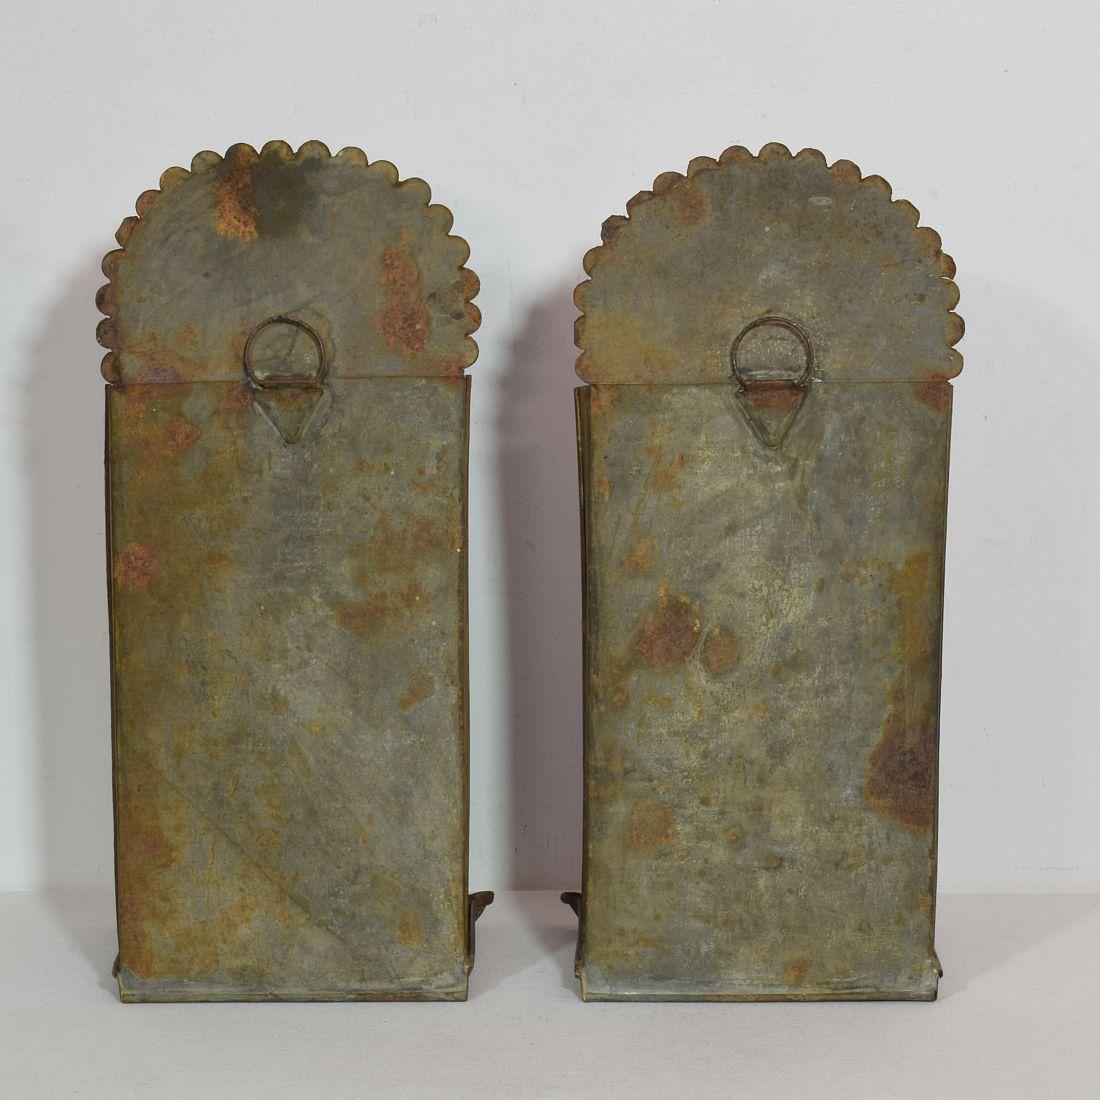 Pair of French, Late 18th, Early 19th Century Iron Wall Candleholders 1